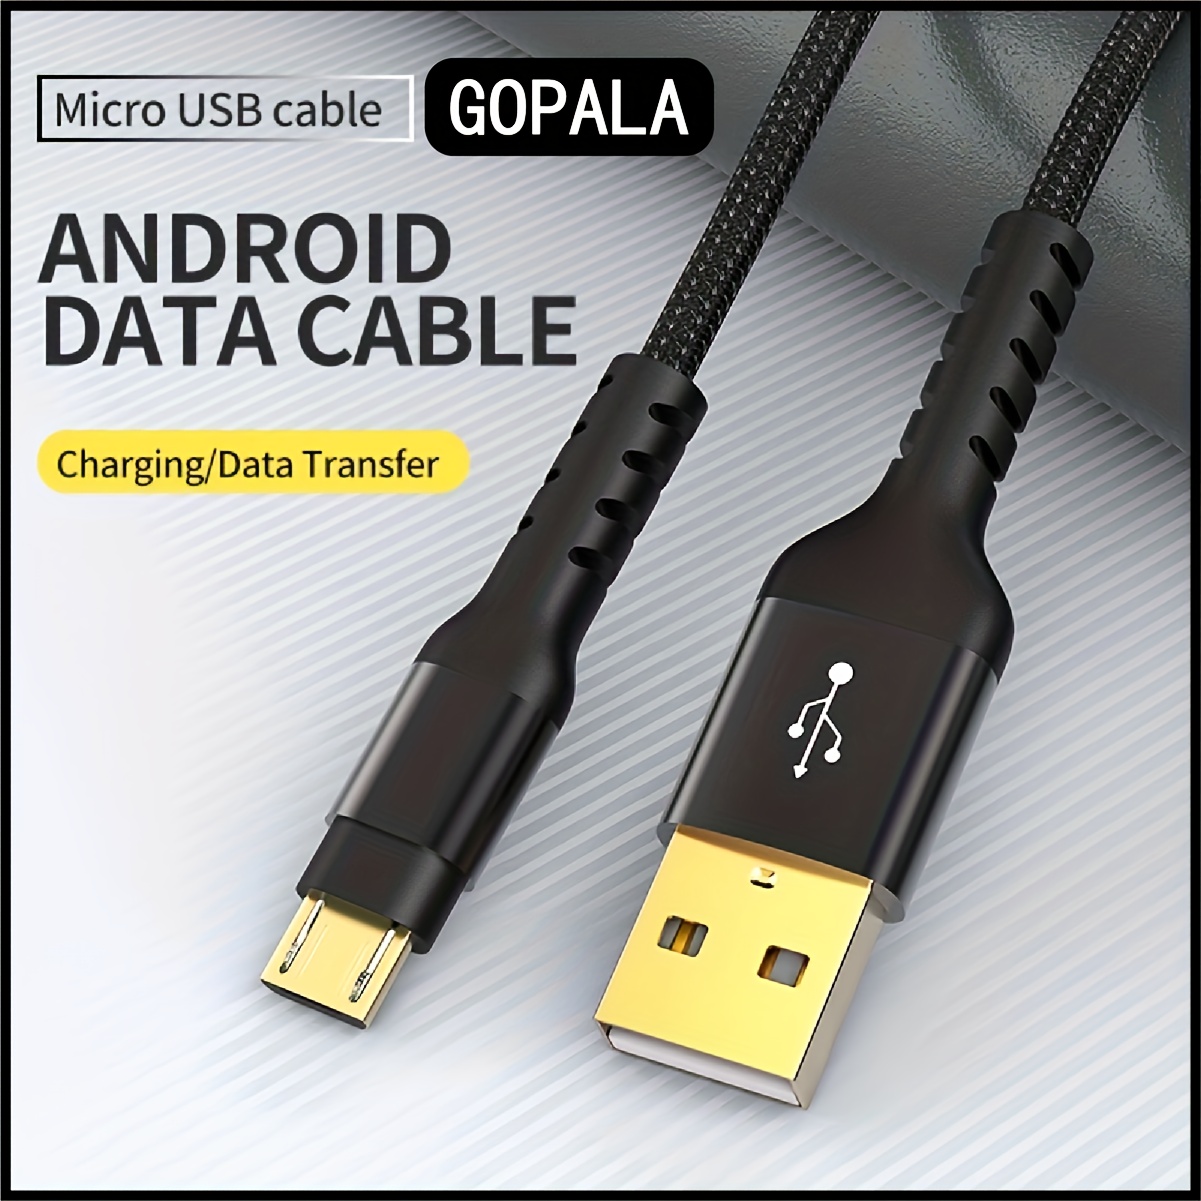 CABLING® Câble Micro USB - Usb 3M- Synchronisation et chargeur pour  appareils Android smartphone,tablette, Samsung Galaxy, HTC, Sony, Nexus,  Asus